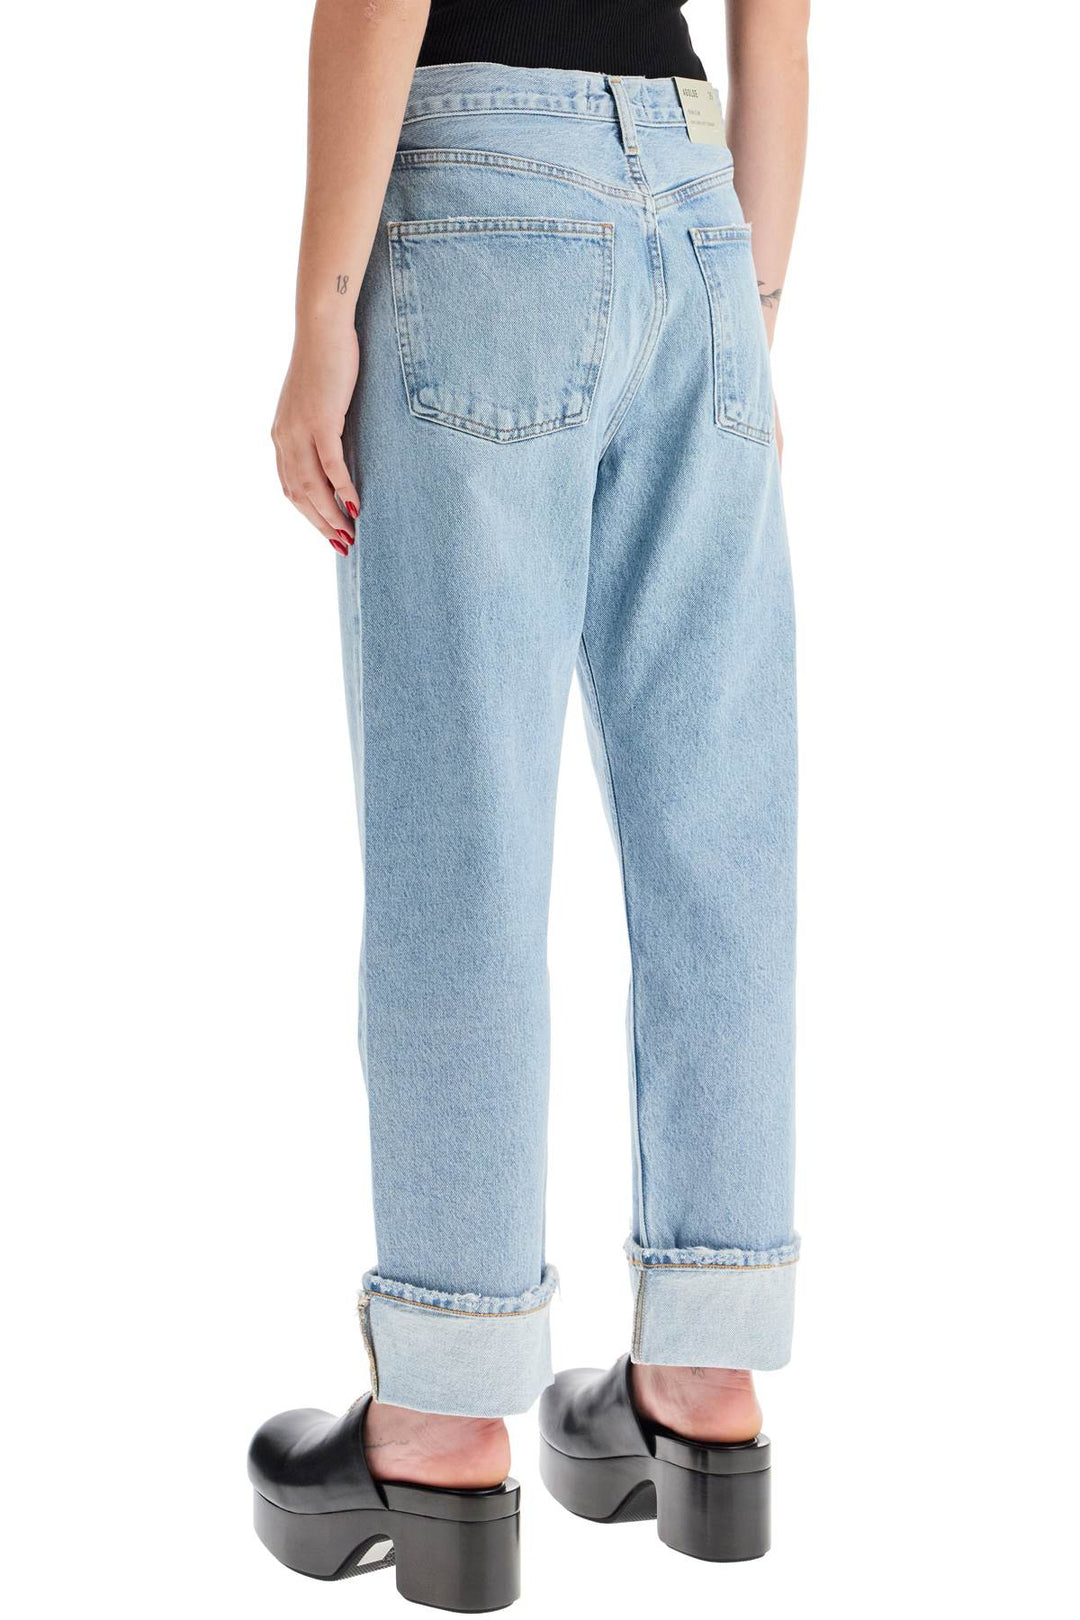 Agolde Used Effect Fran Jeans  Blue